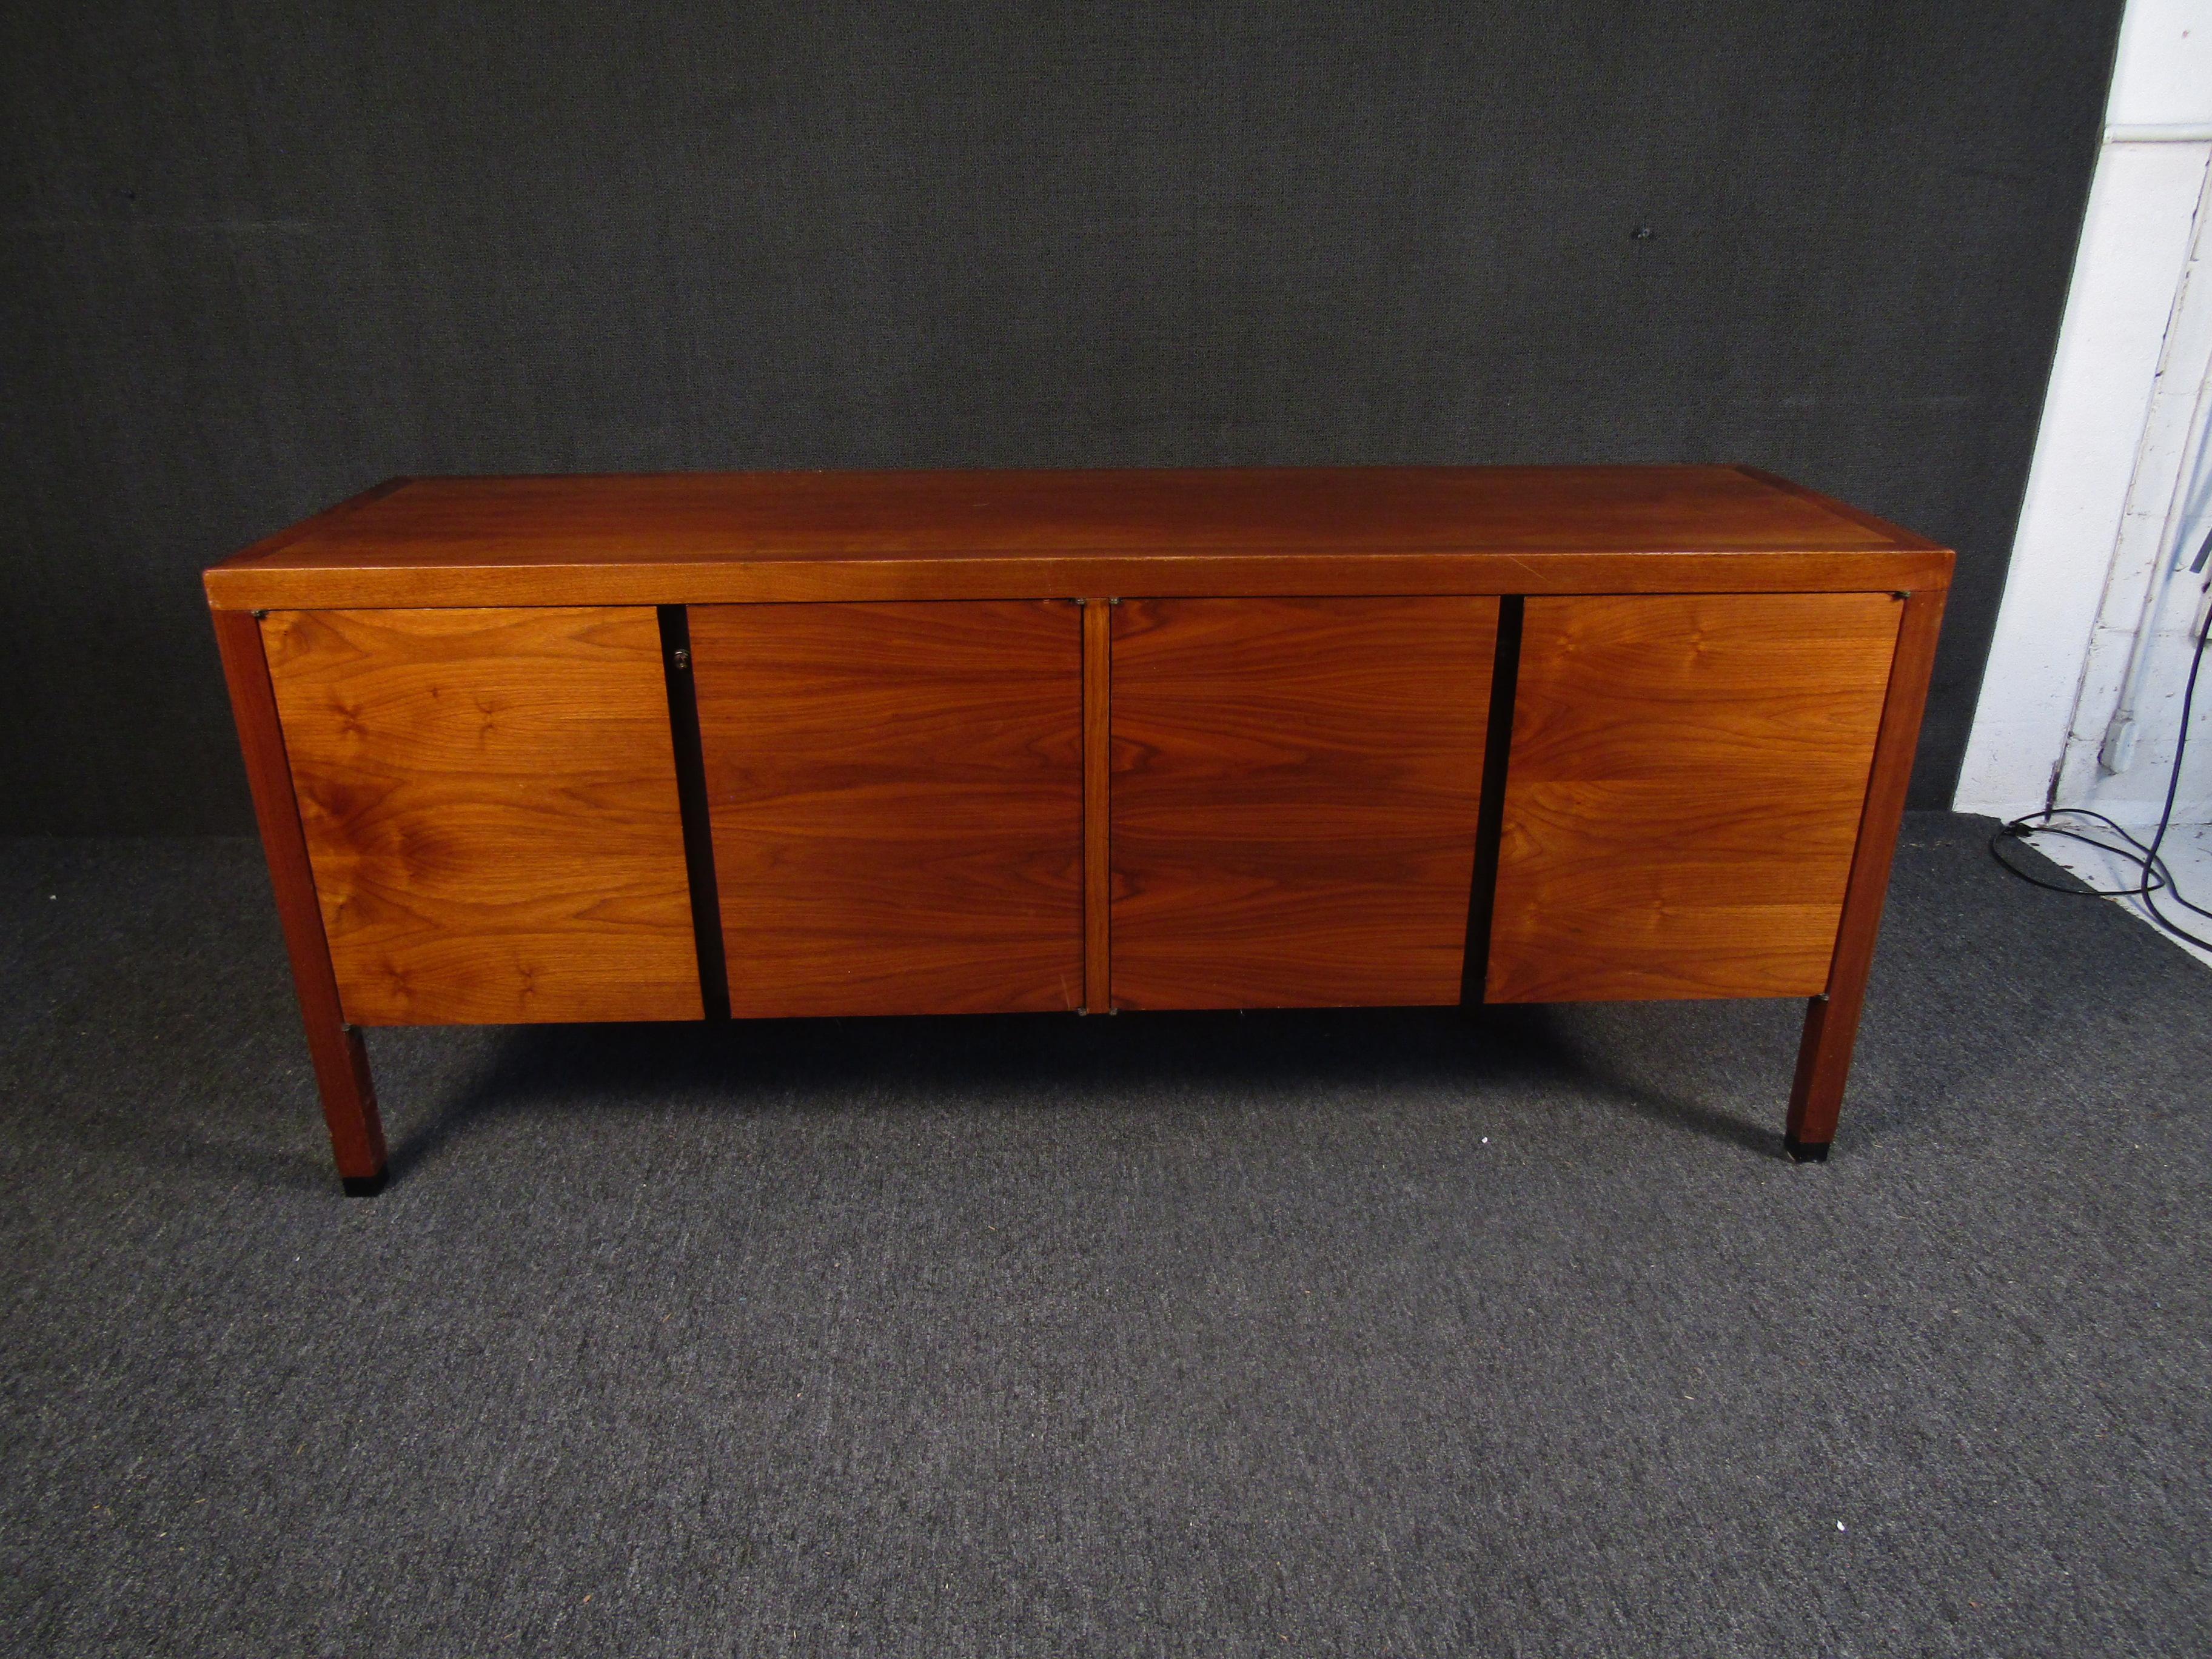 Full of Mid-Century Modern style and quality, this vintage walnut sideboard offers plenty of storage and room for organization. 
Please confirm item location with seller (NY/NJ).